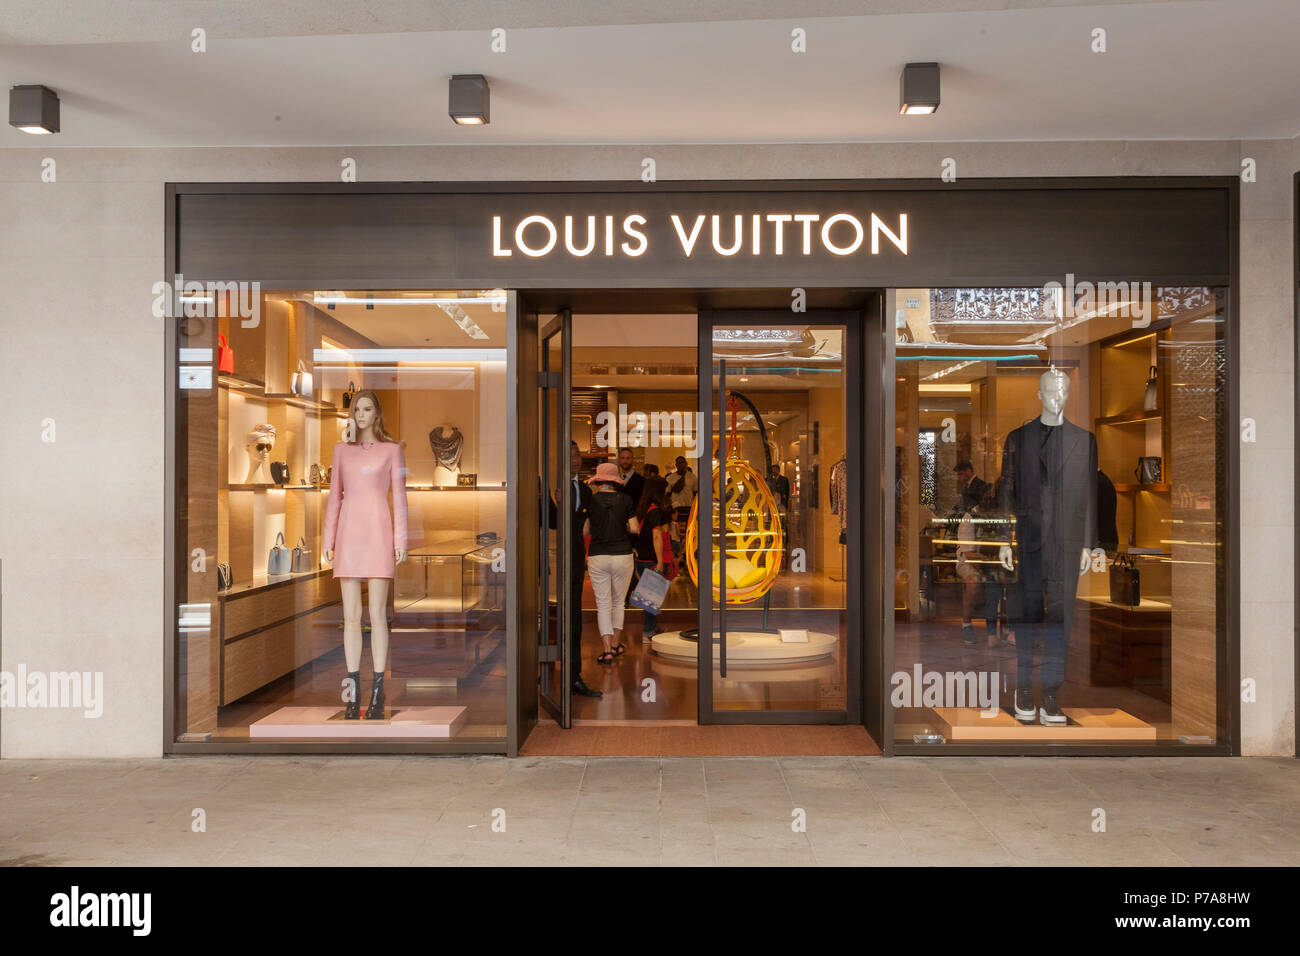 Louis Vuitton In San Marcos Outlet | Confederated Tribes of the Umatilla Indian Reservation